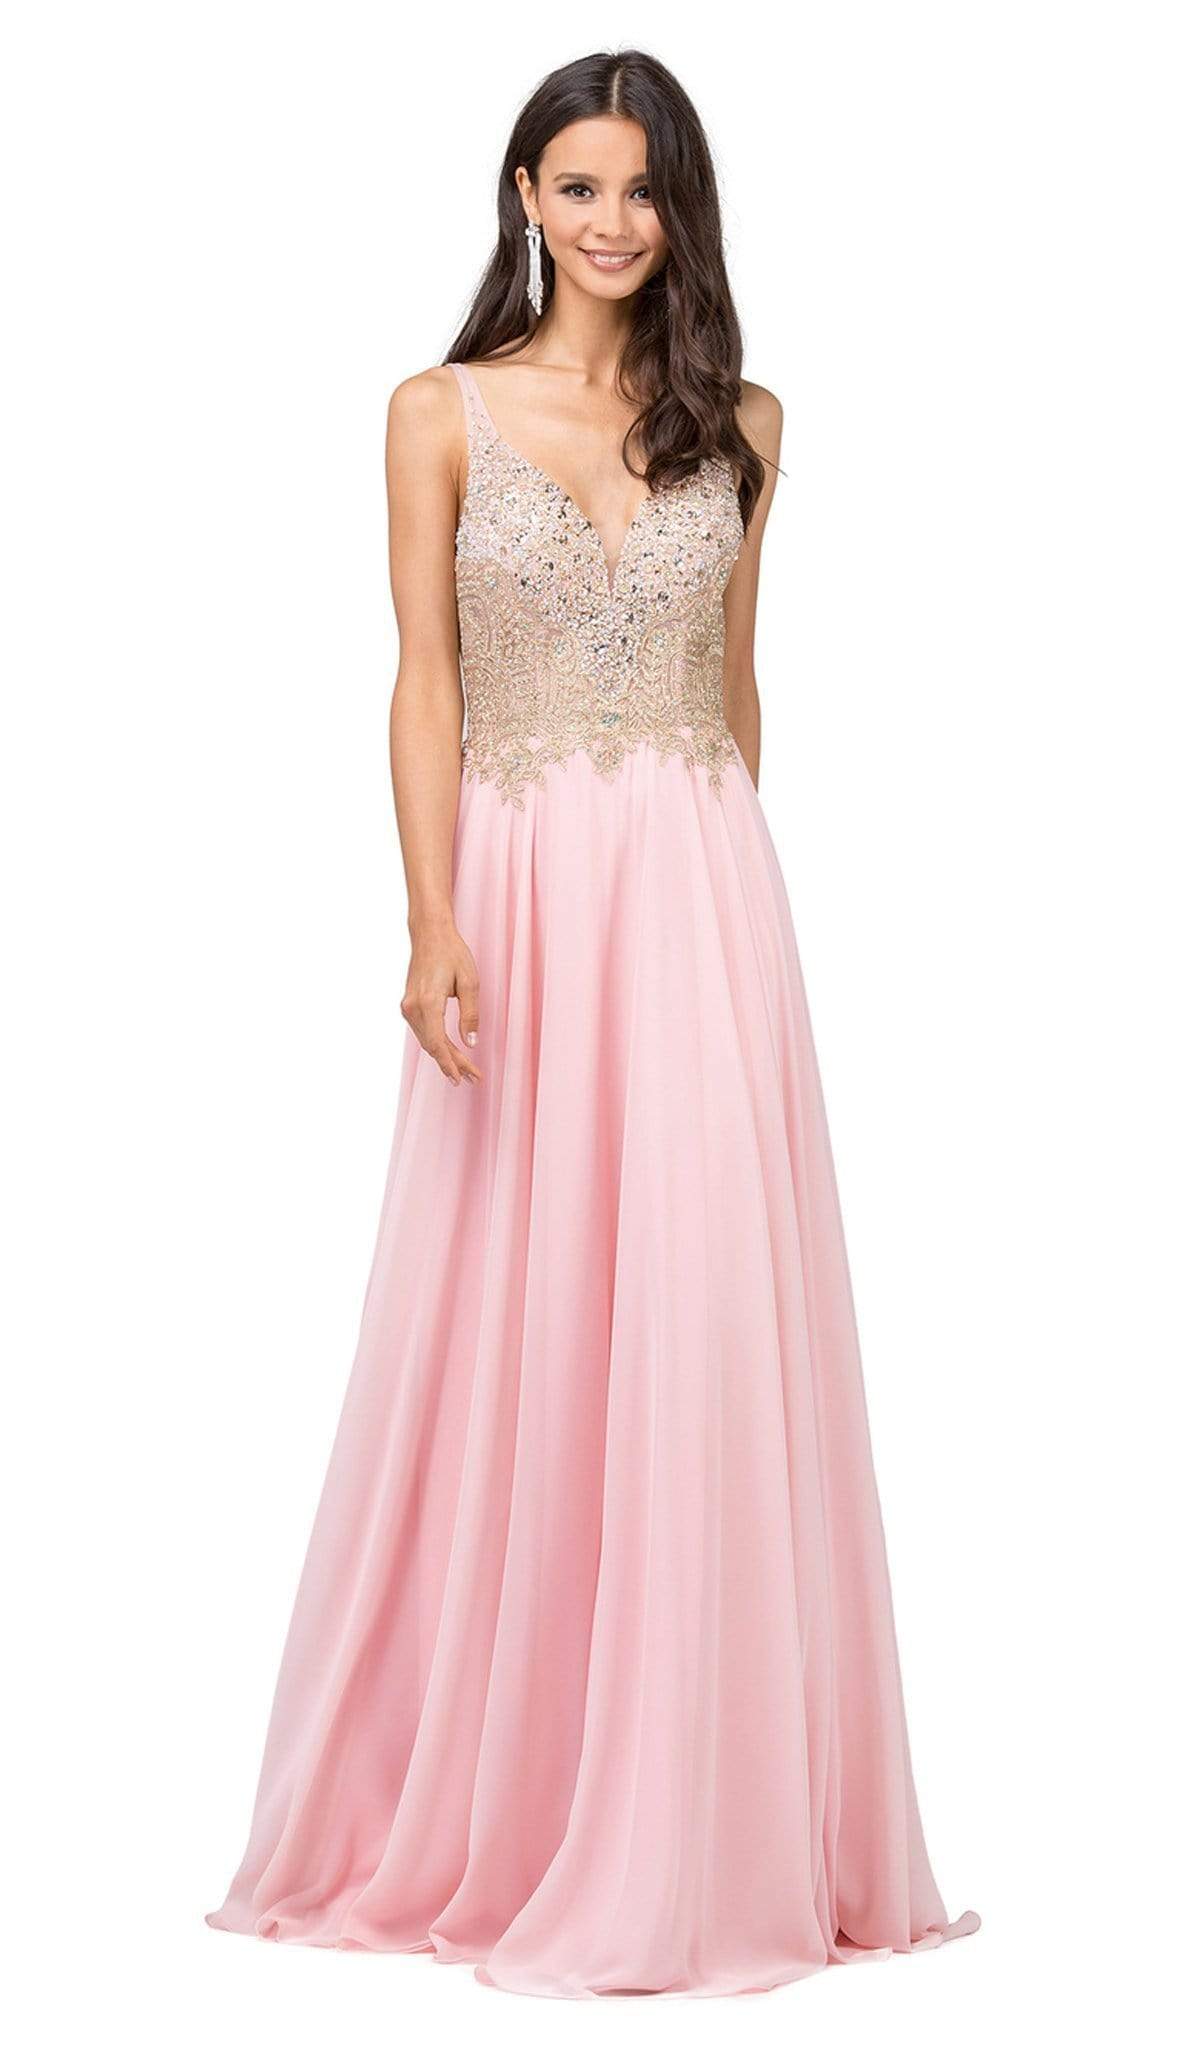 Image of Dancing Queen - 2259 Beaded Plunging Sweetheart Chiffon Prom Dress